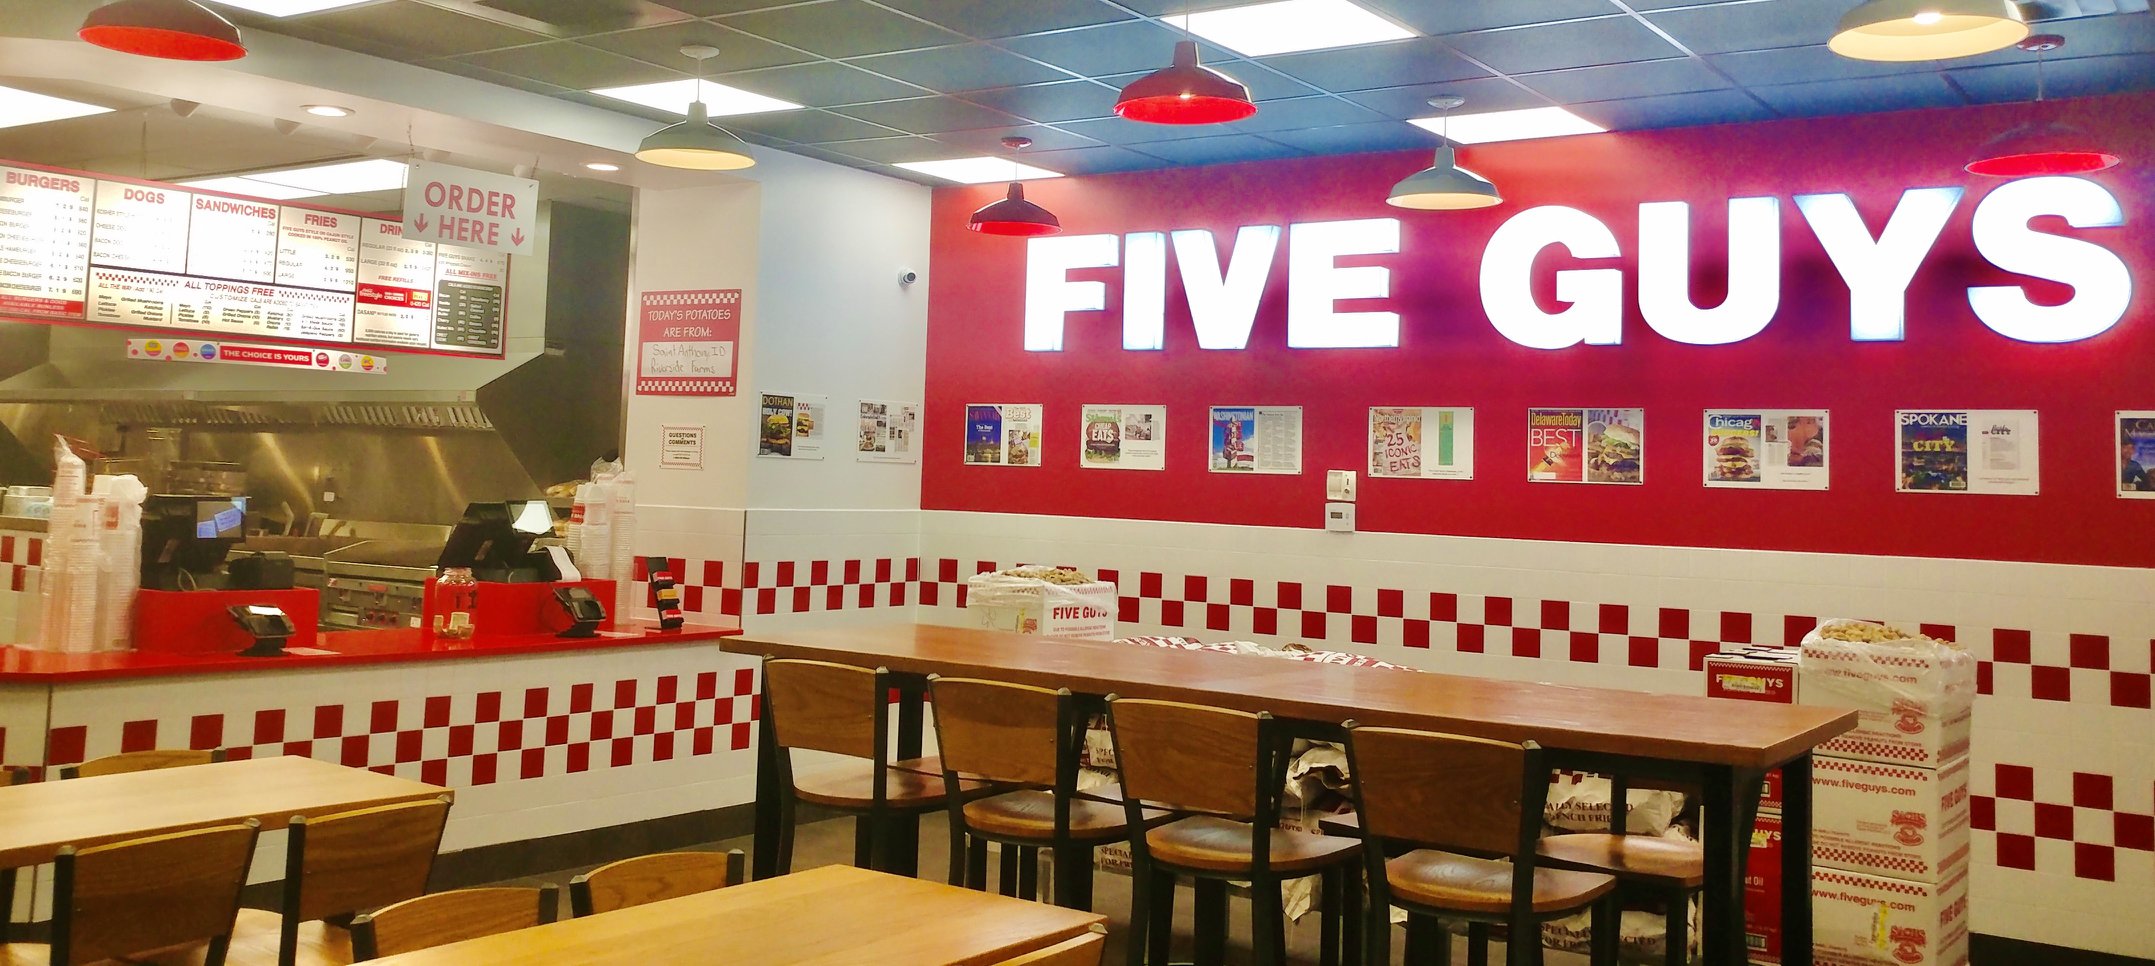 Five Guys Burgers & Fries Is A Virginia-Based Burger Chain